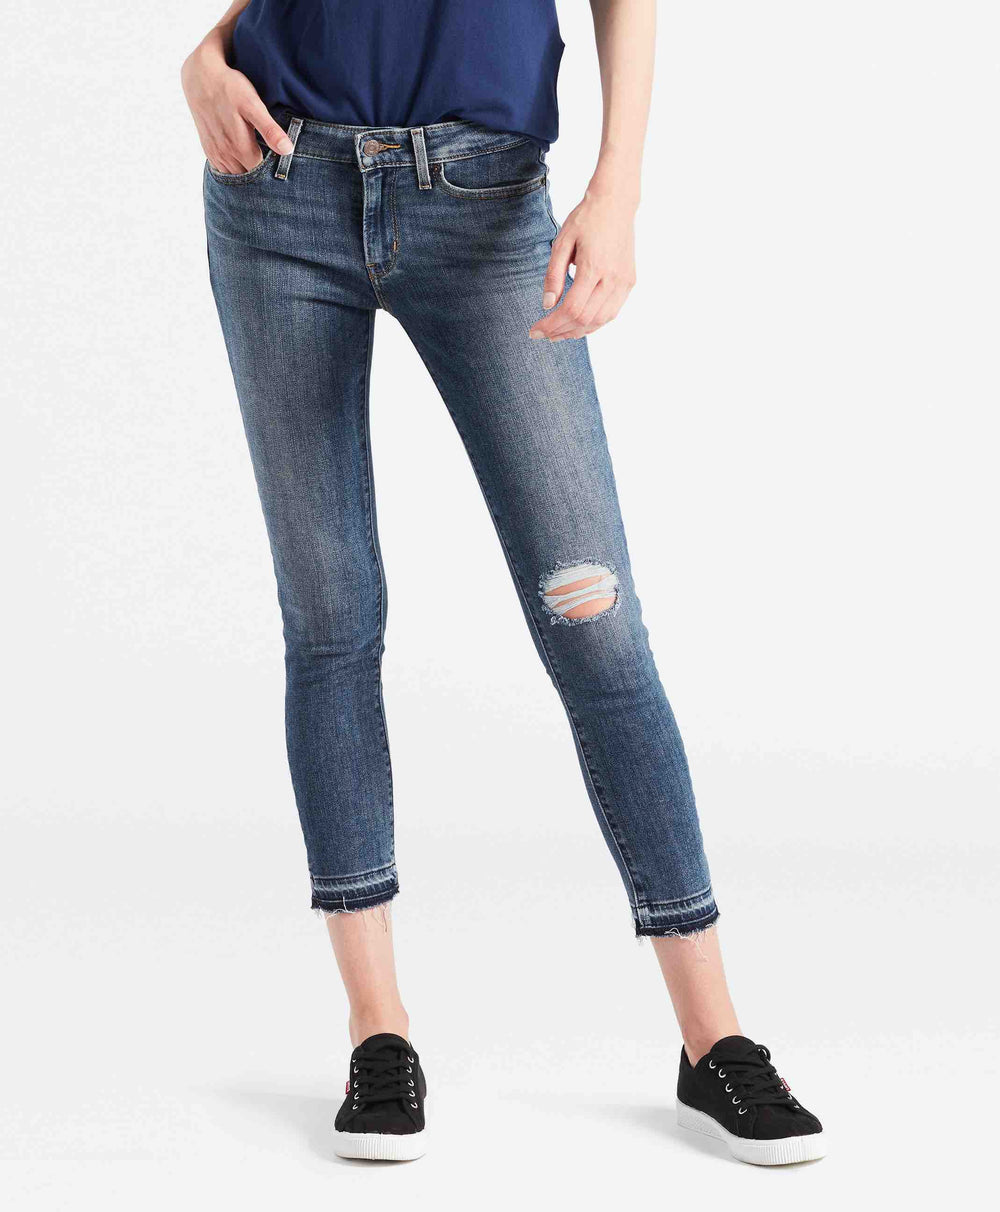 711 Skinny Ankle Jeans